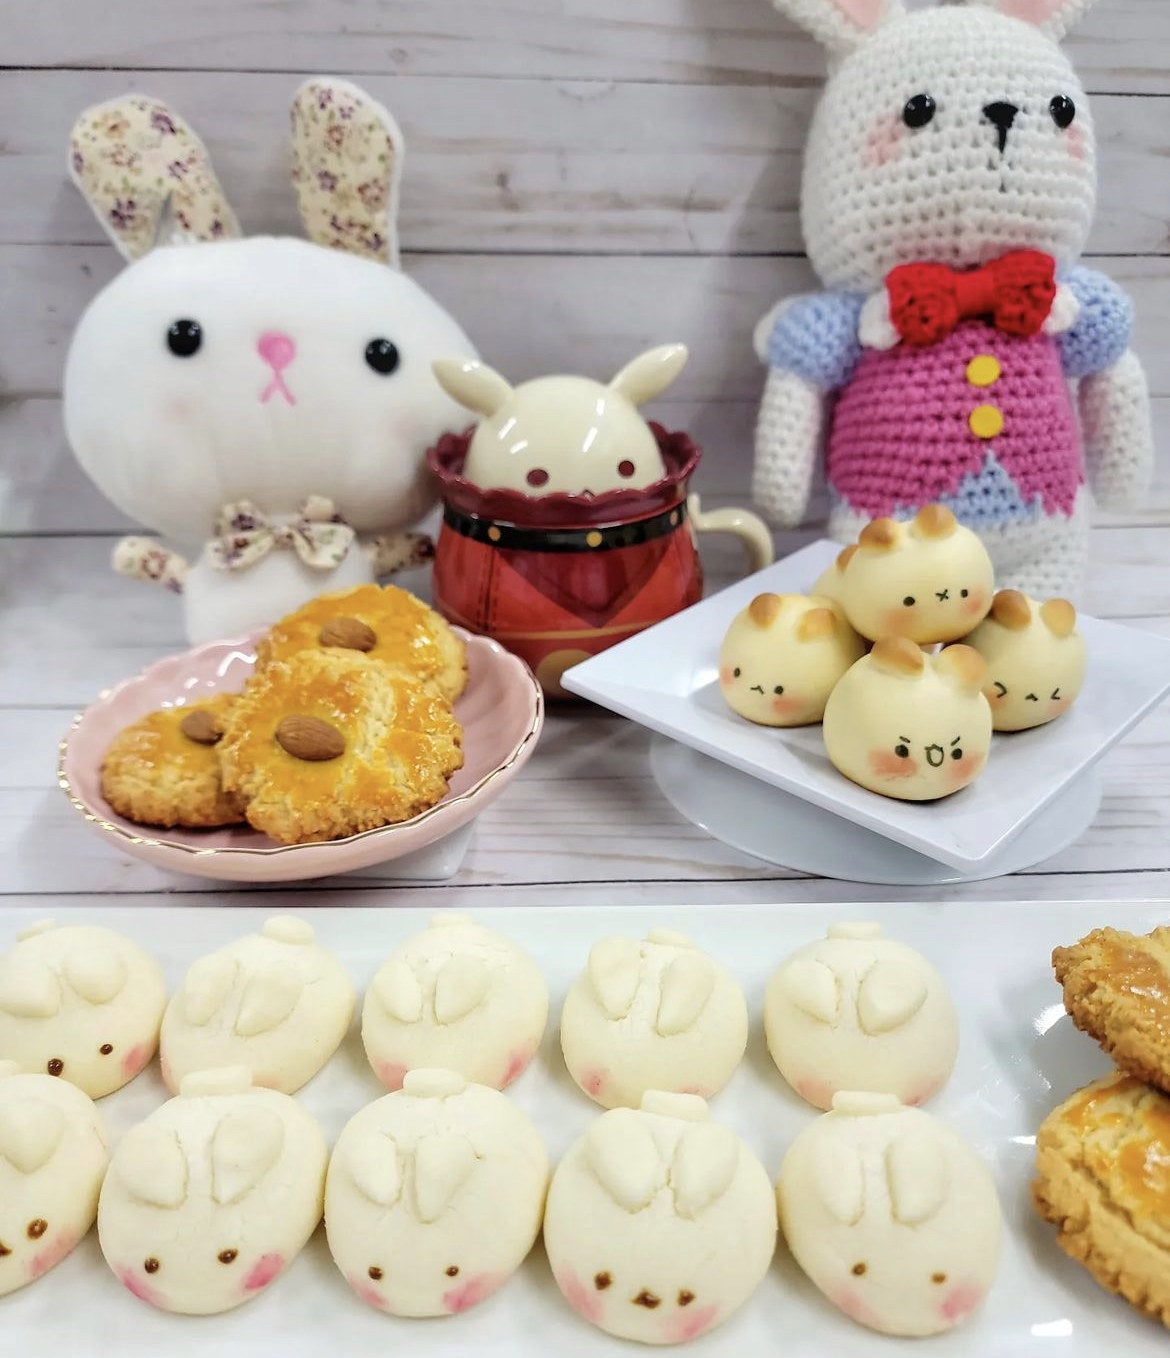 Bunny shaped cookies, breads, and eclairs on wooden white table next to plush bunnies.